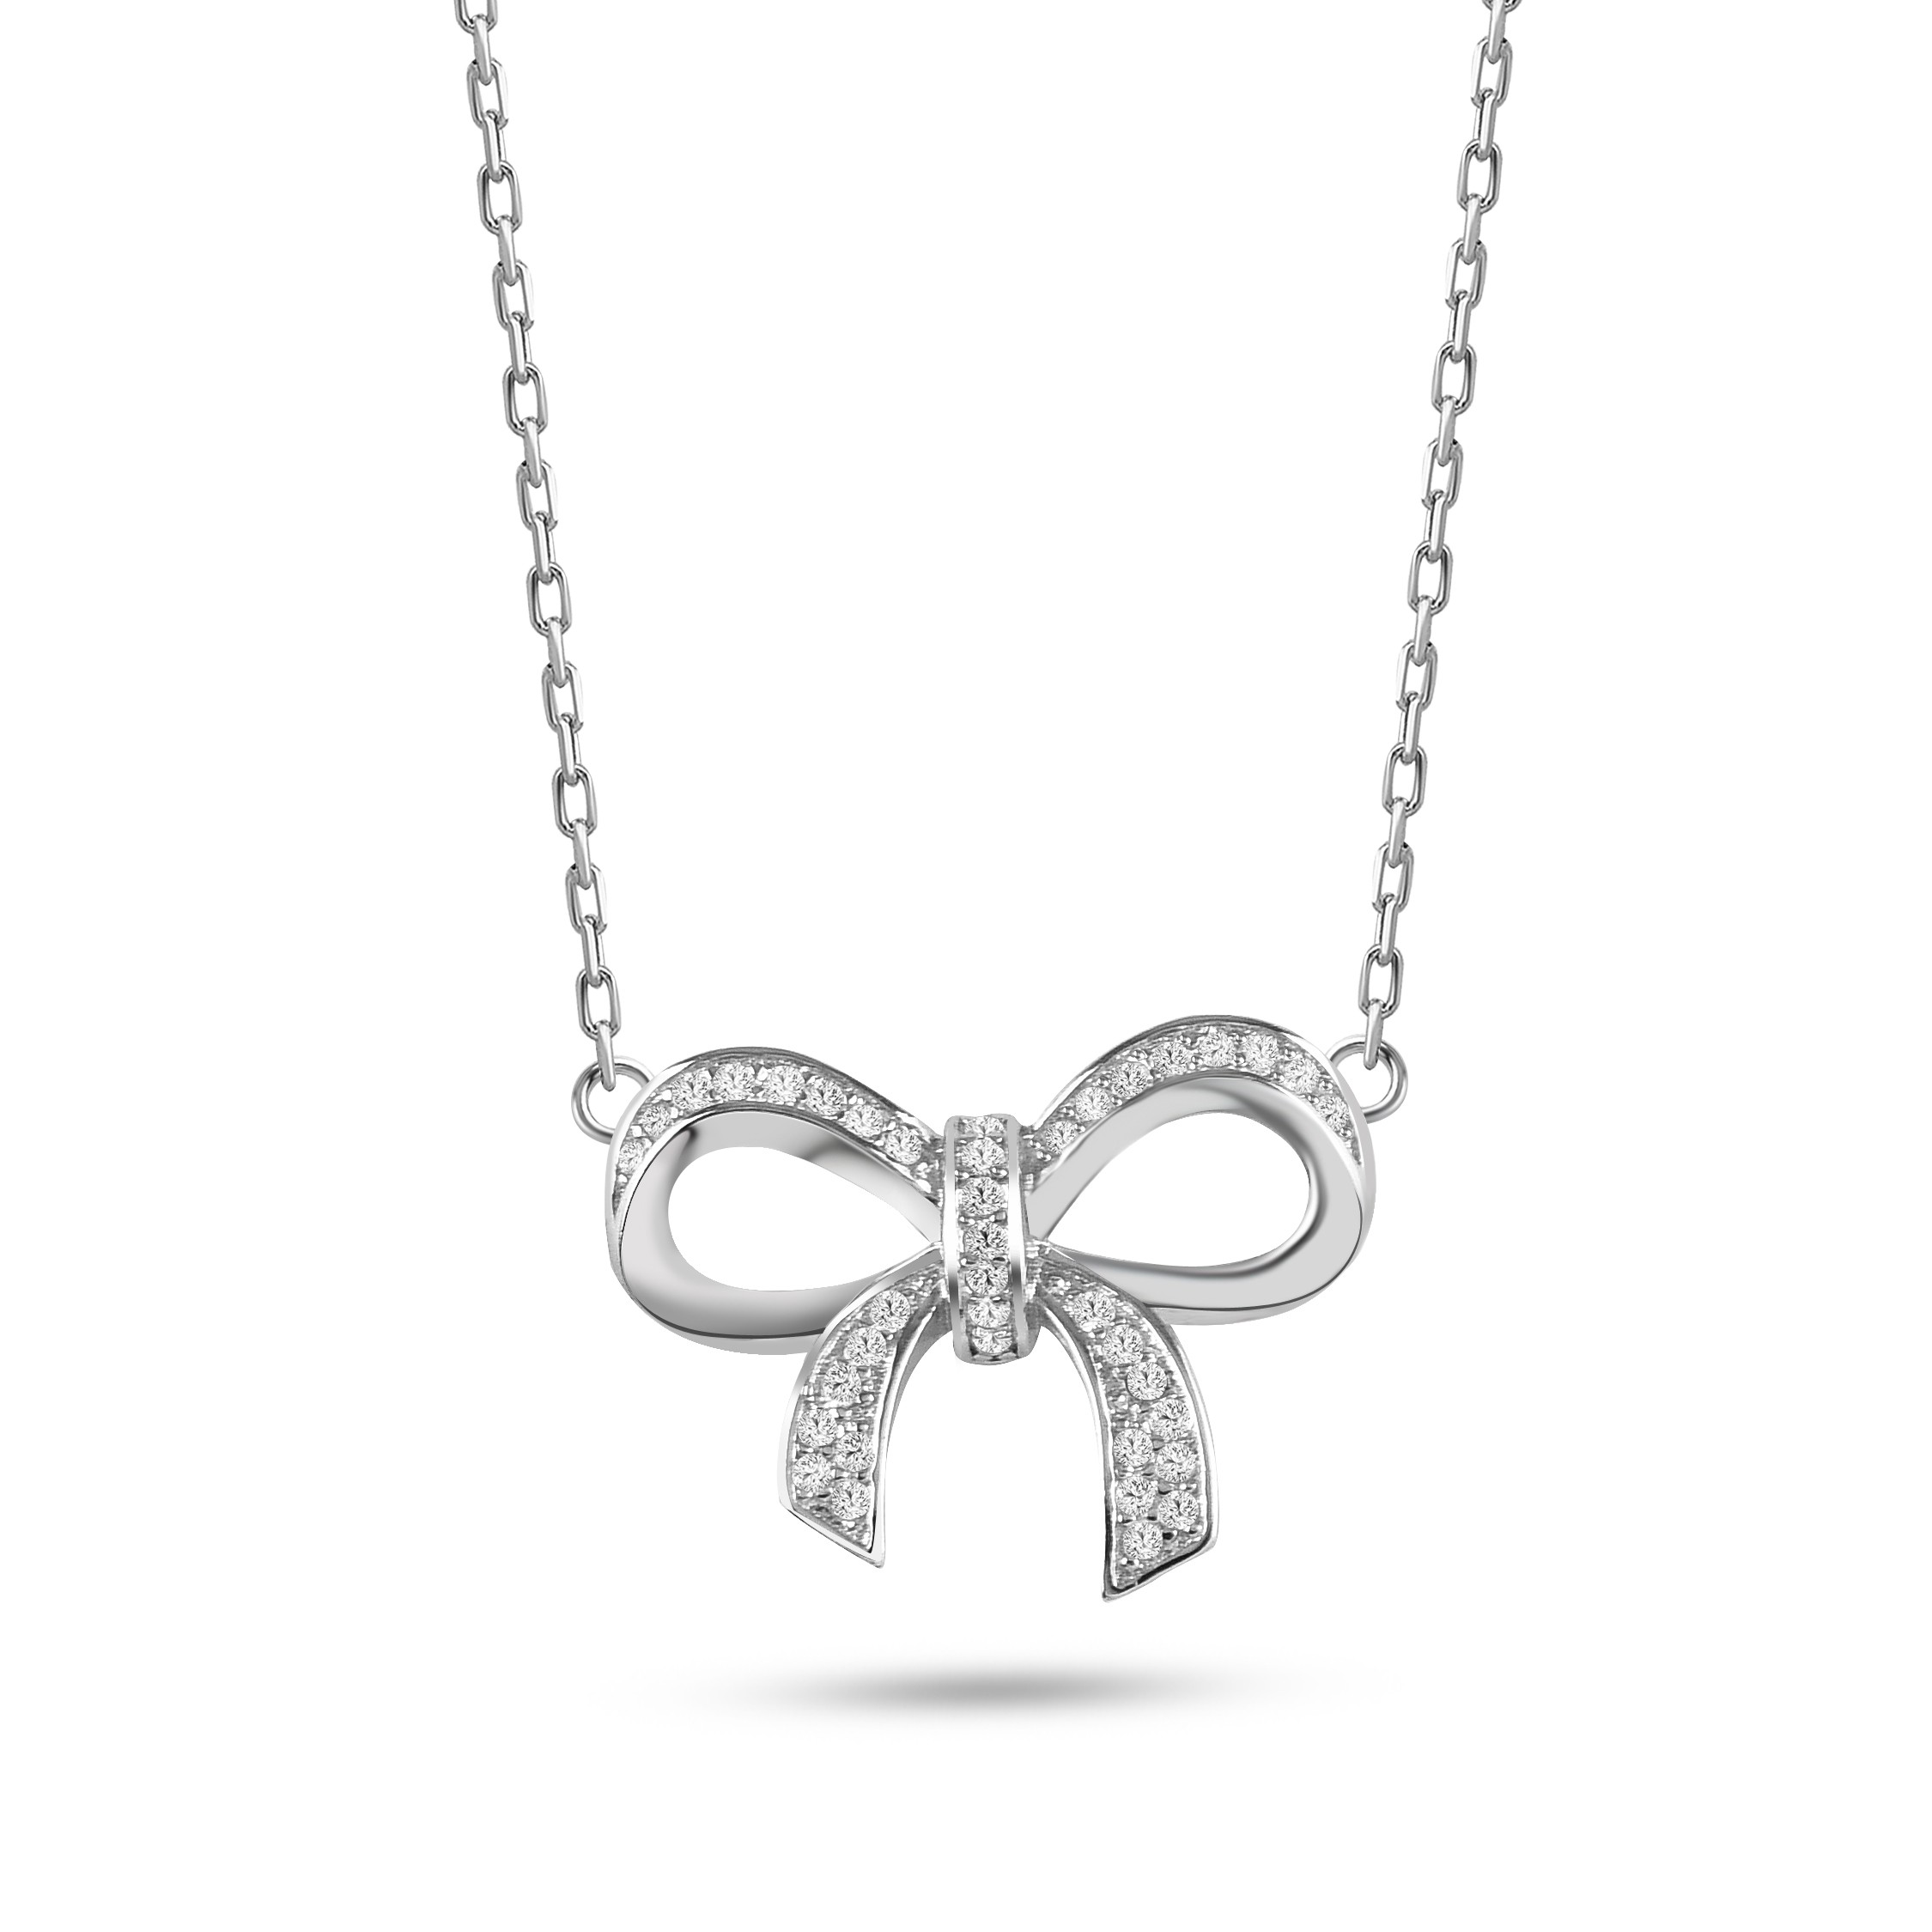 THE BOW NECKLACE